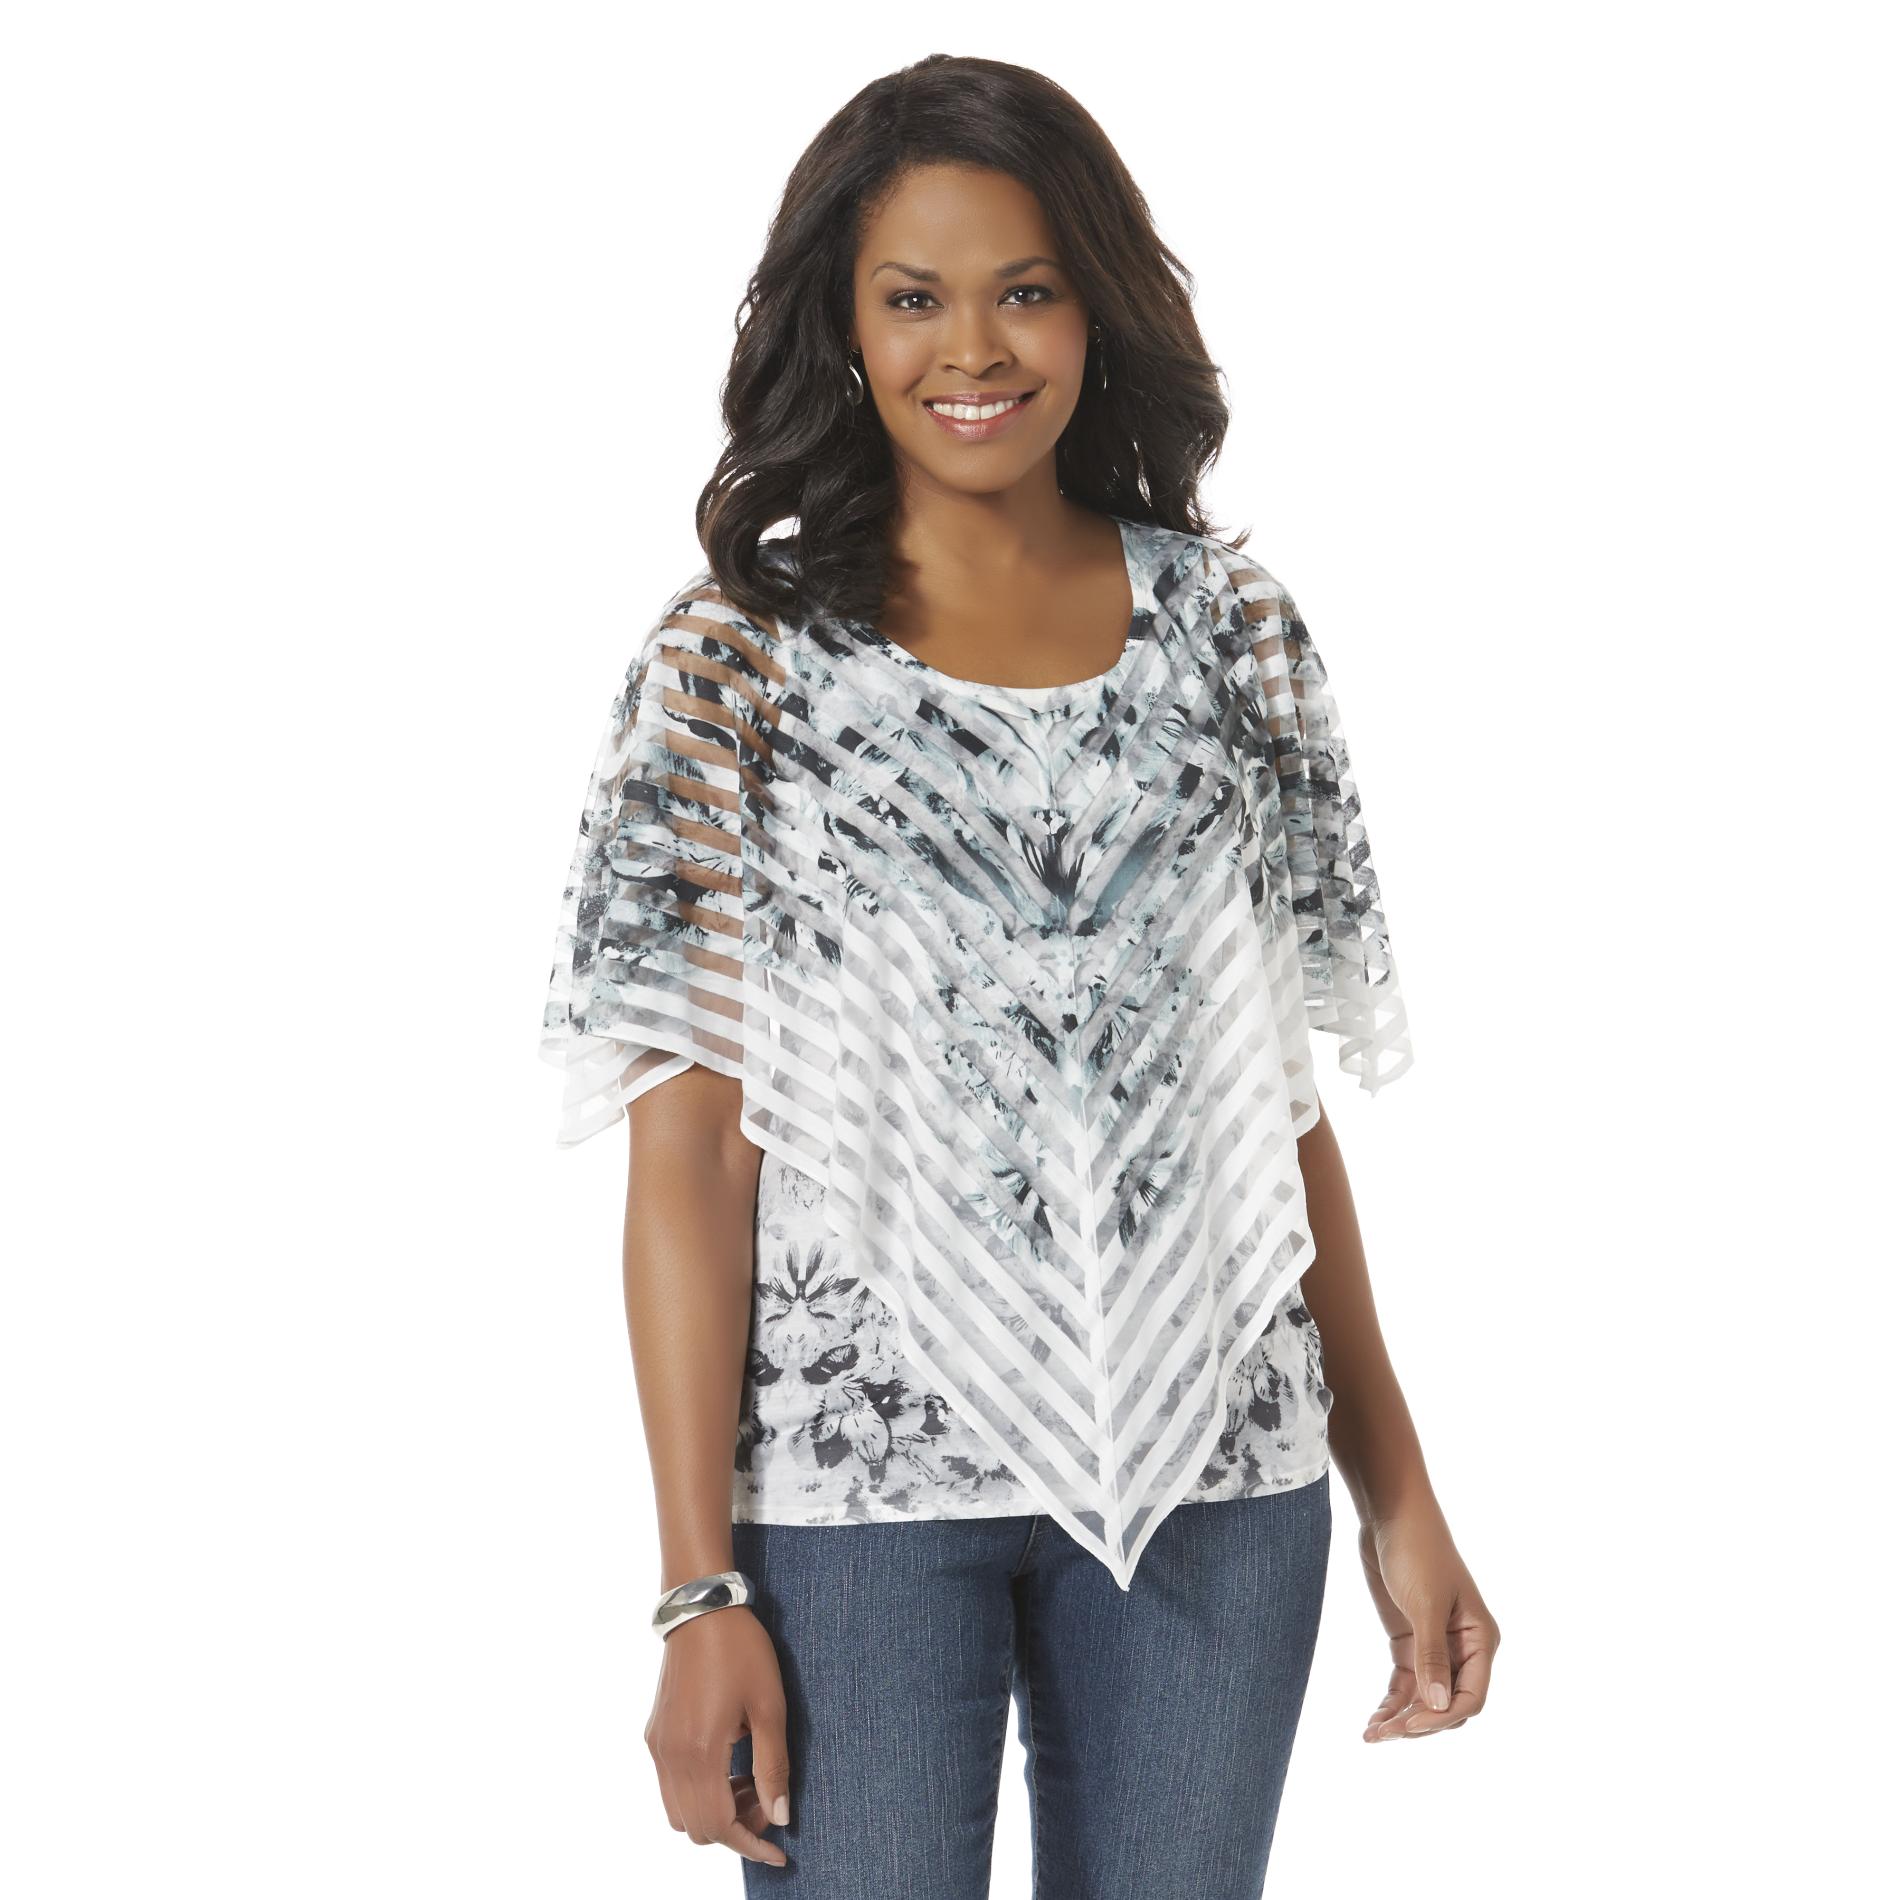 Live and Let Live Women's Tank Top & Poncho - Floral